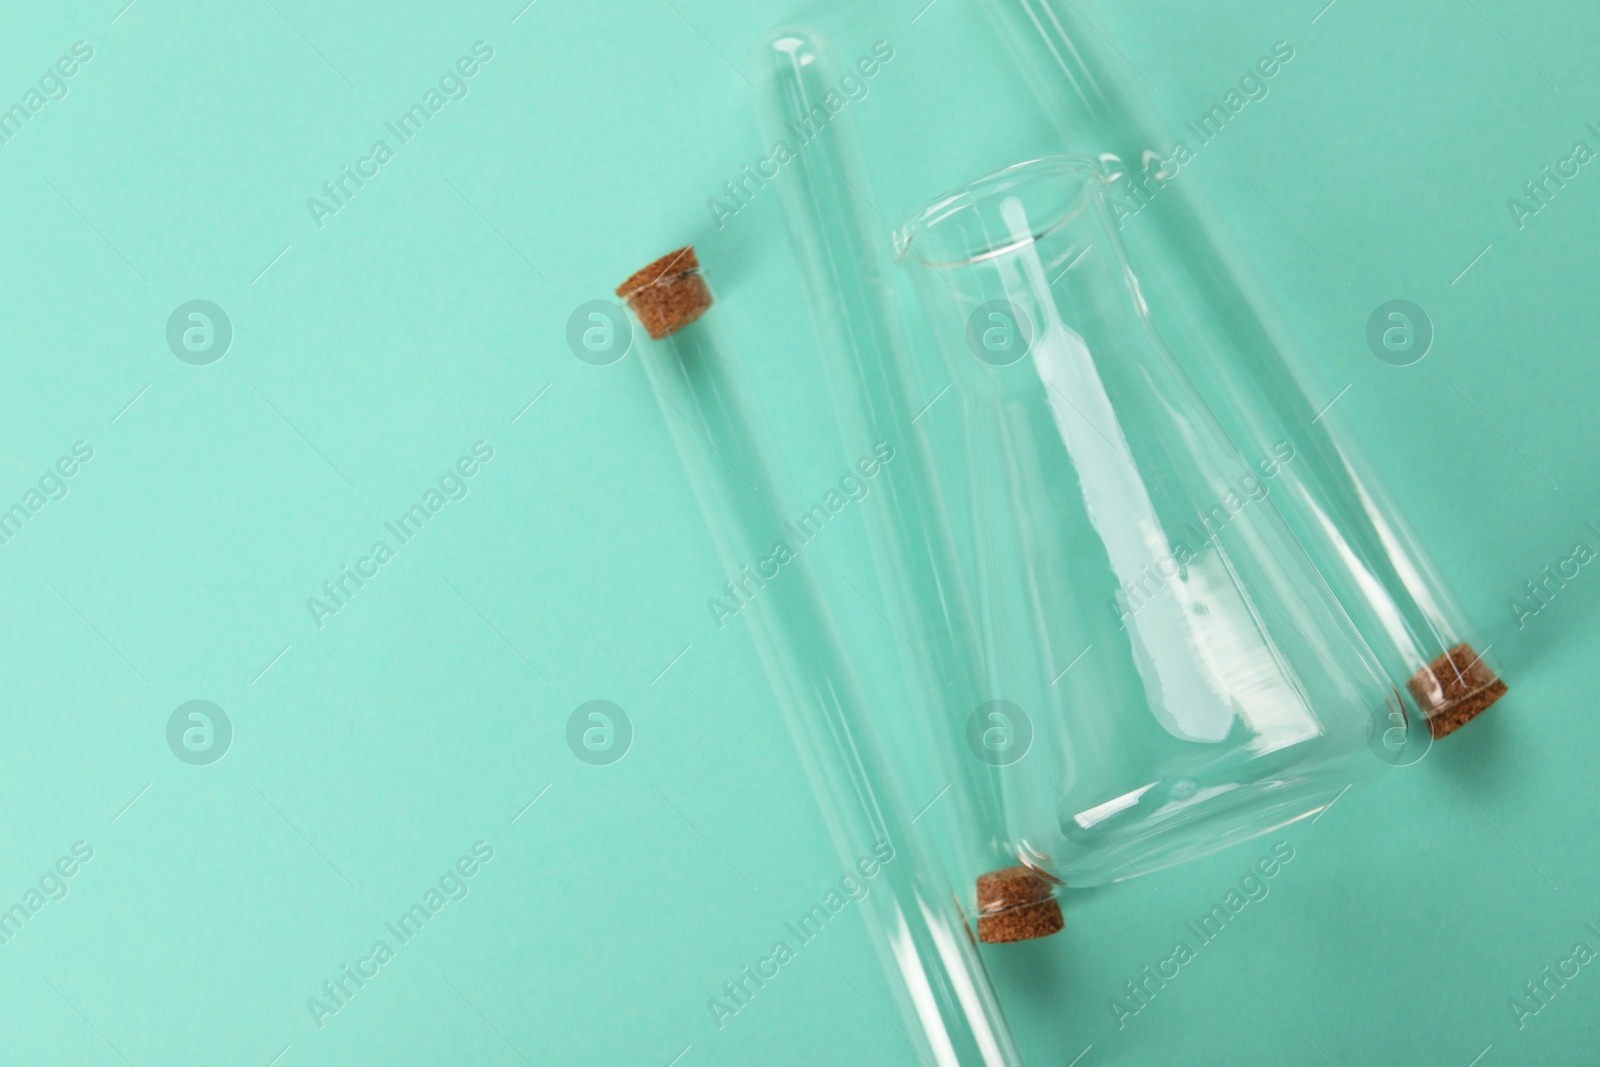 Photo of Flask and test tubes on turquoise background, flat lay with space for text. Laboratory glassware